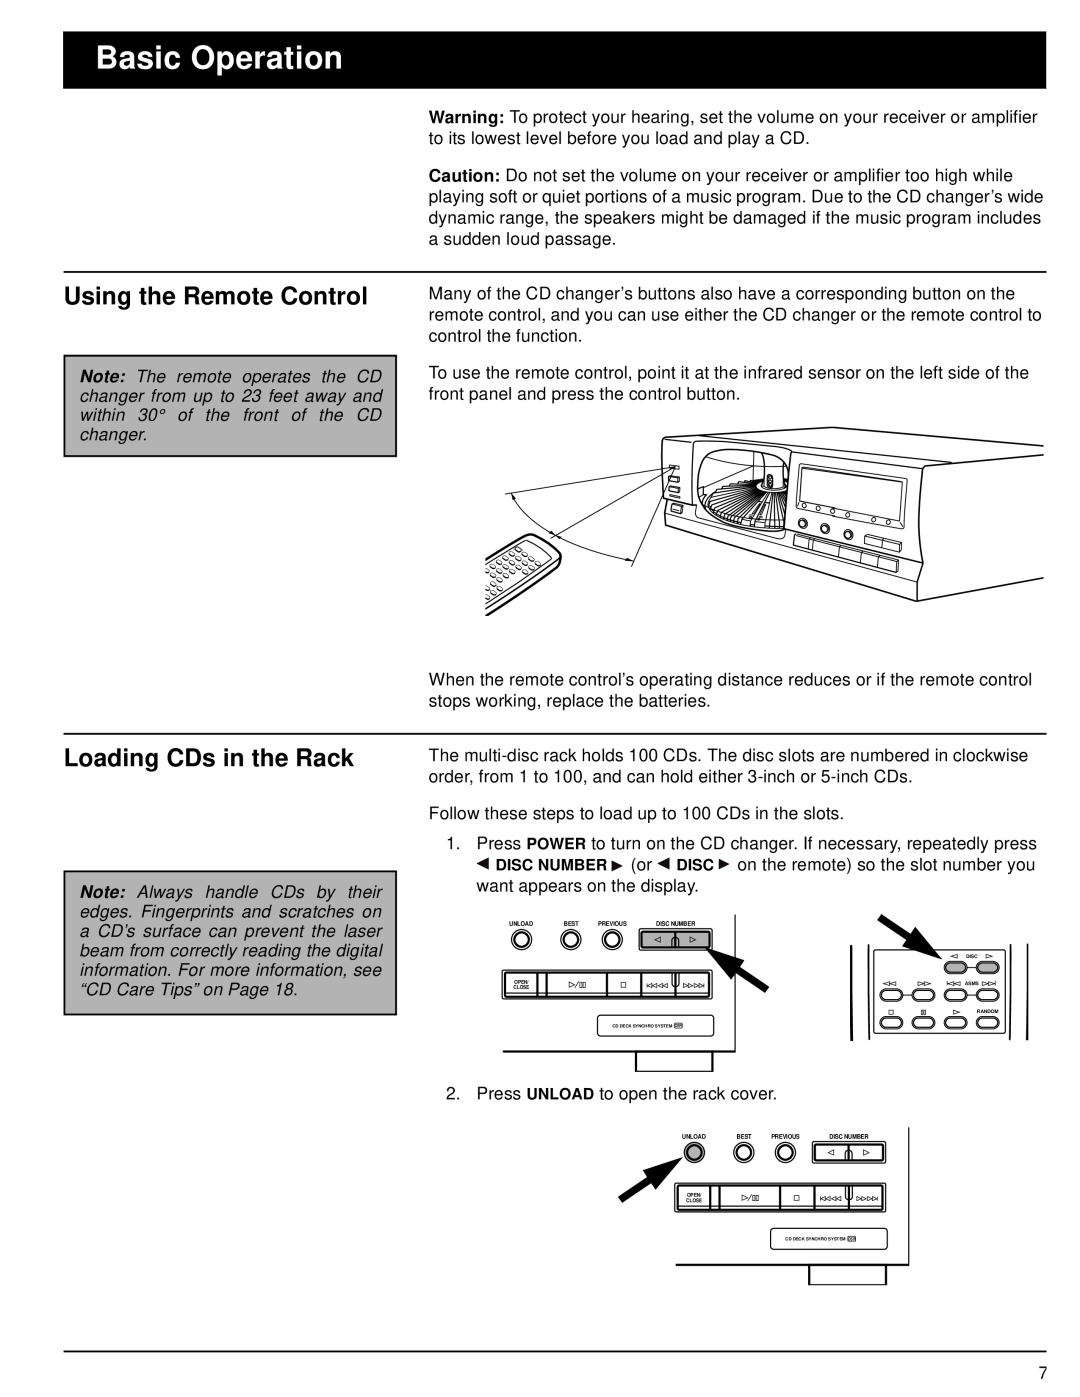 Radio Shack CD-8400 owner manual Basic Operation, Using the Remote Control, Loading CDs in the Rack 